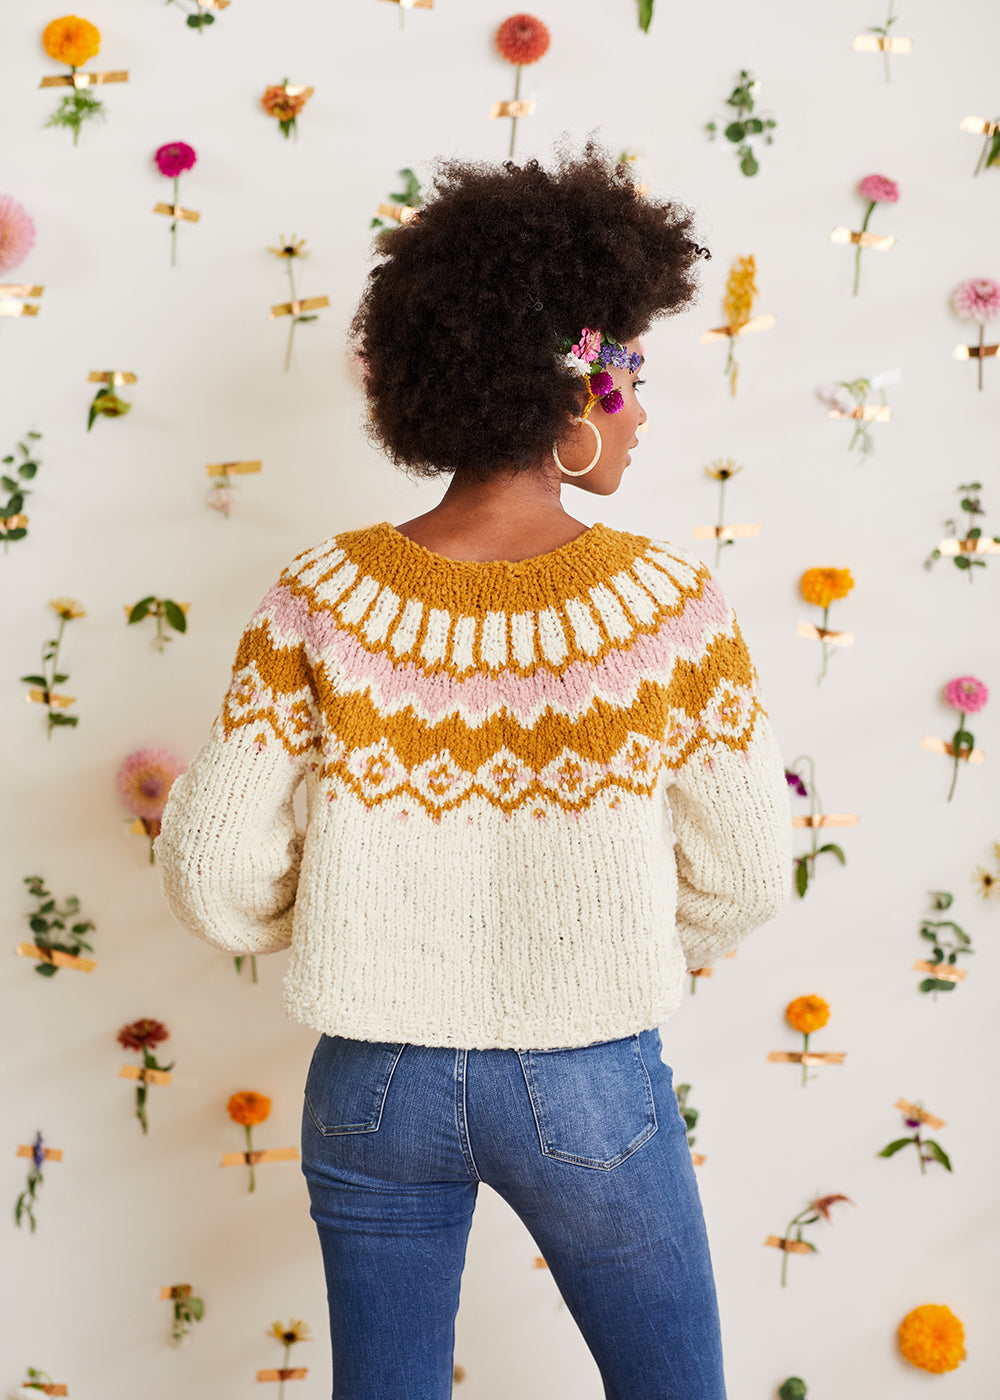 Express Yourself Sweater Pattern